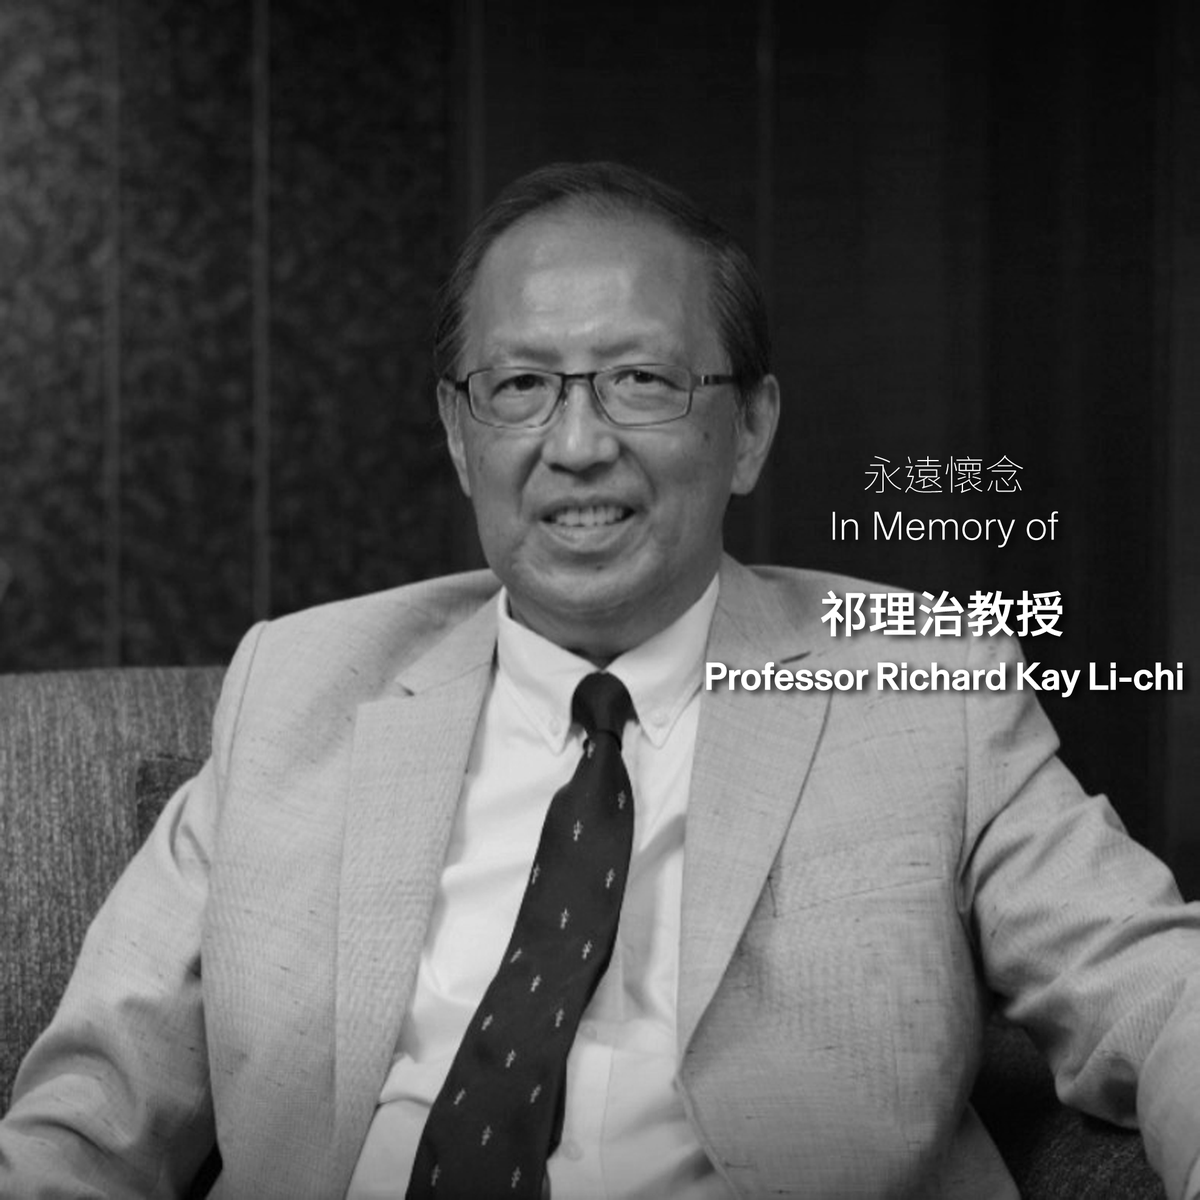 Professor Richard Kay Li-chi, a world-renowned expert on neurology and former Chief of Neurology at the Department of Medicine and Therapeutics at CUHK, passed away on 15 February 2024. CUHK Neurology is deeply saddened over his passing and he will be remembered fondly.